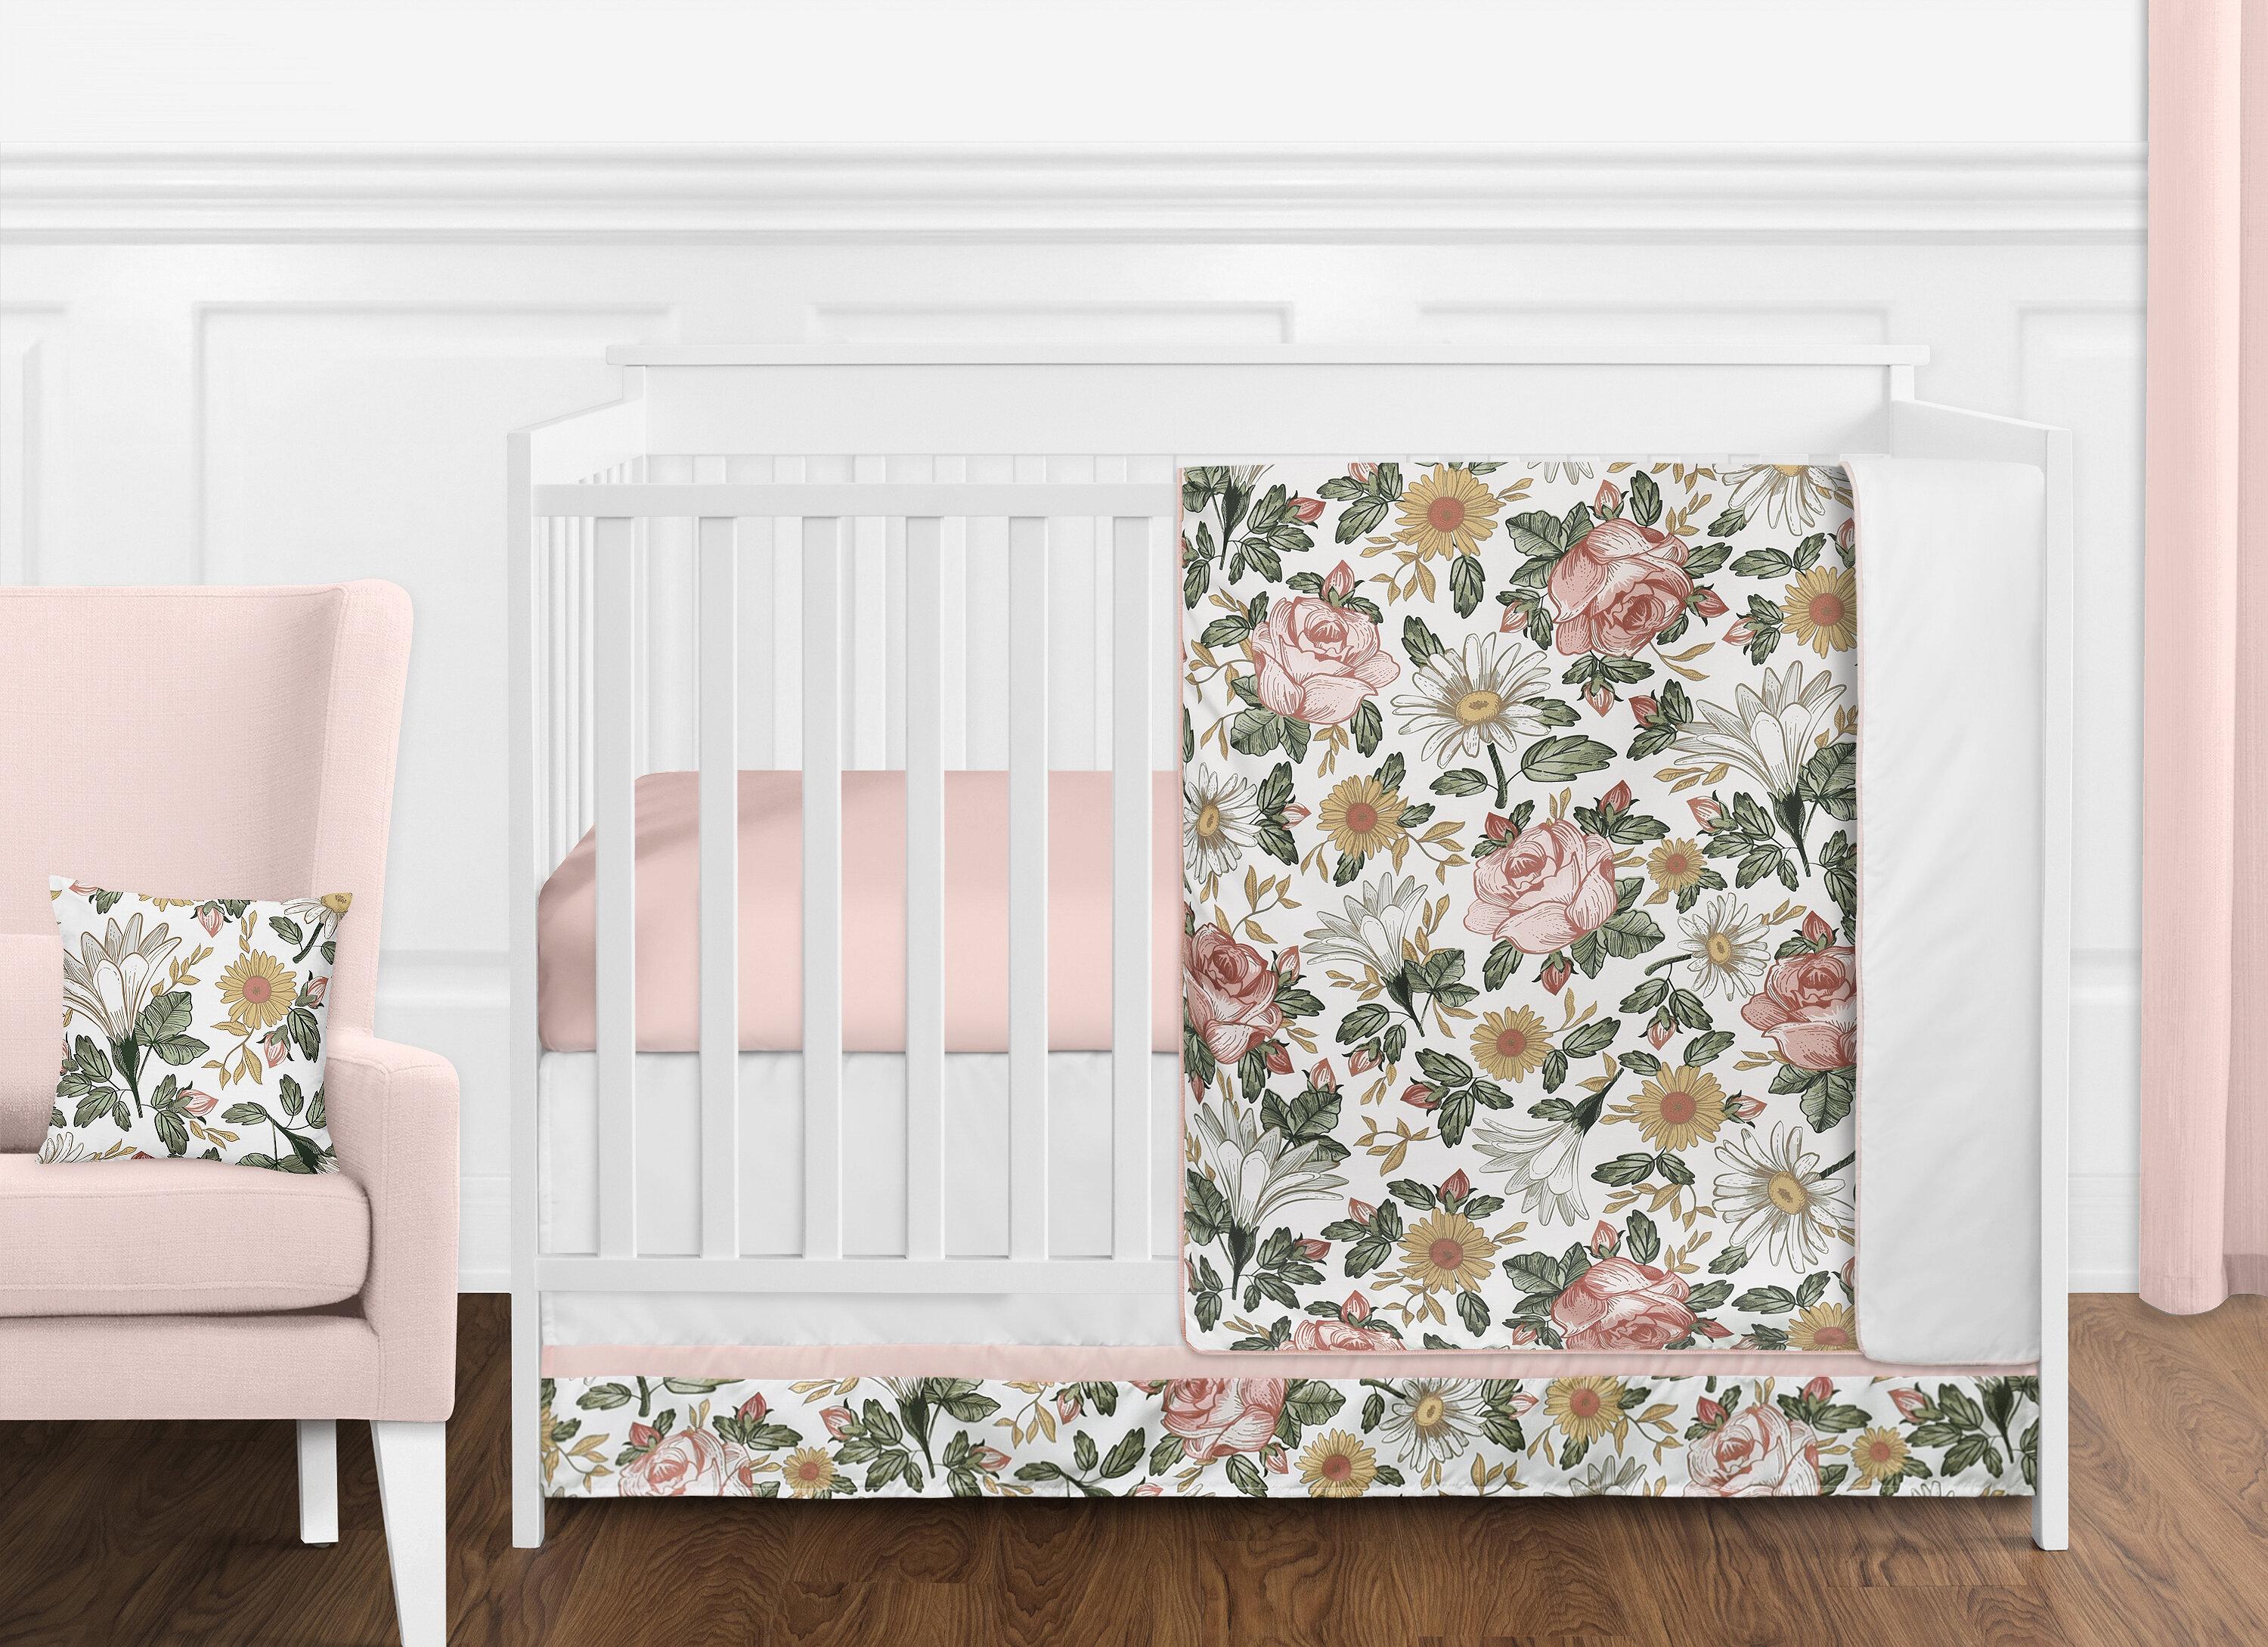 Blush Pink Grey and White Watercolor Floral Baby Girl Crib Bedding Set without Bumper by Sweet Jojo Designs Rose Flower Polka Dot 4 pc